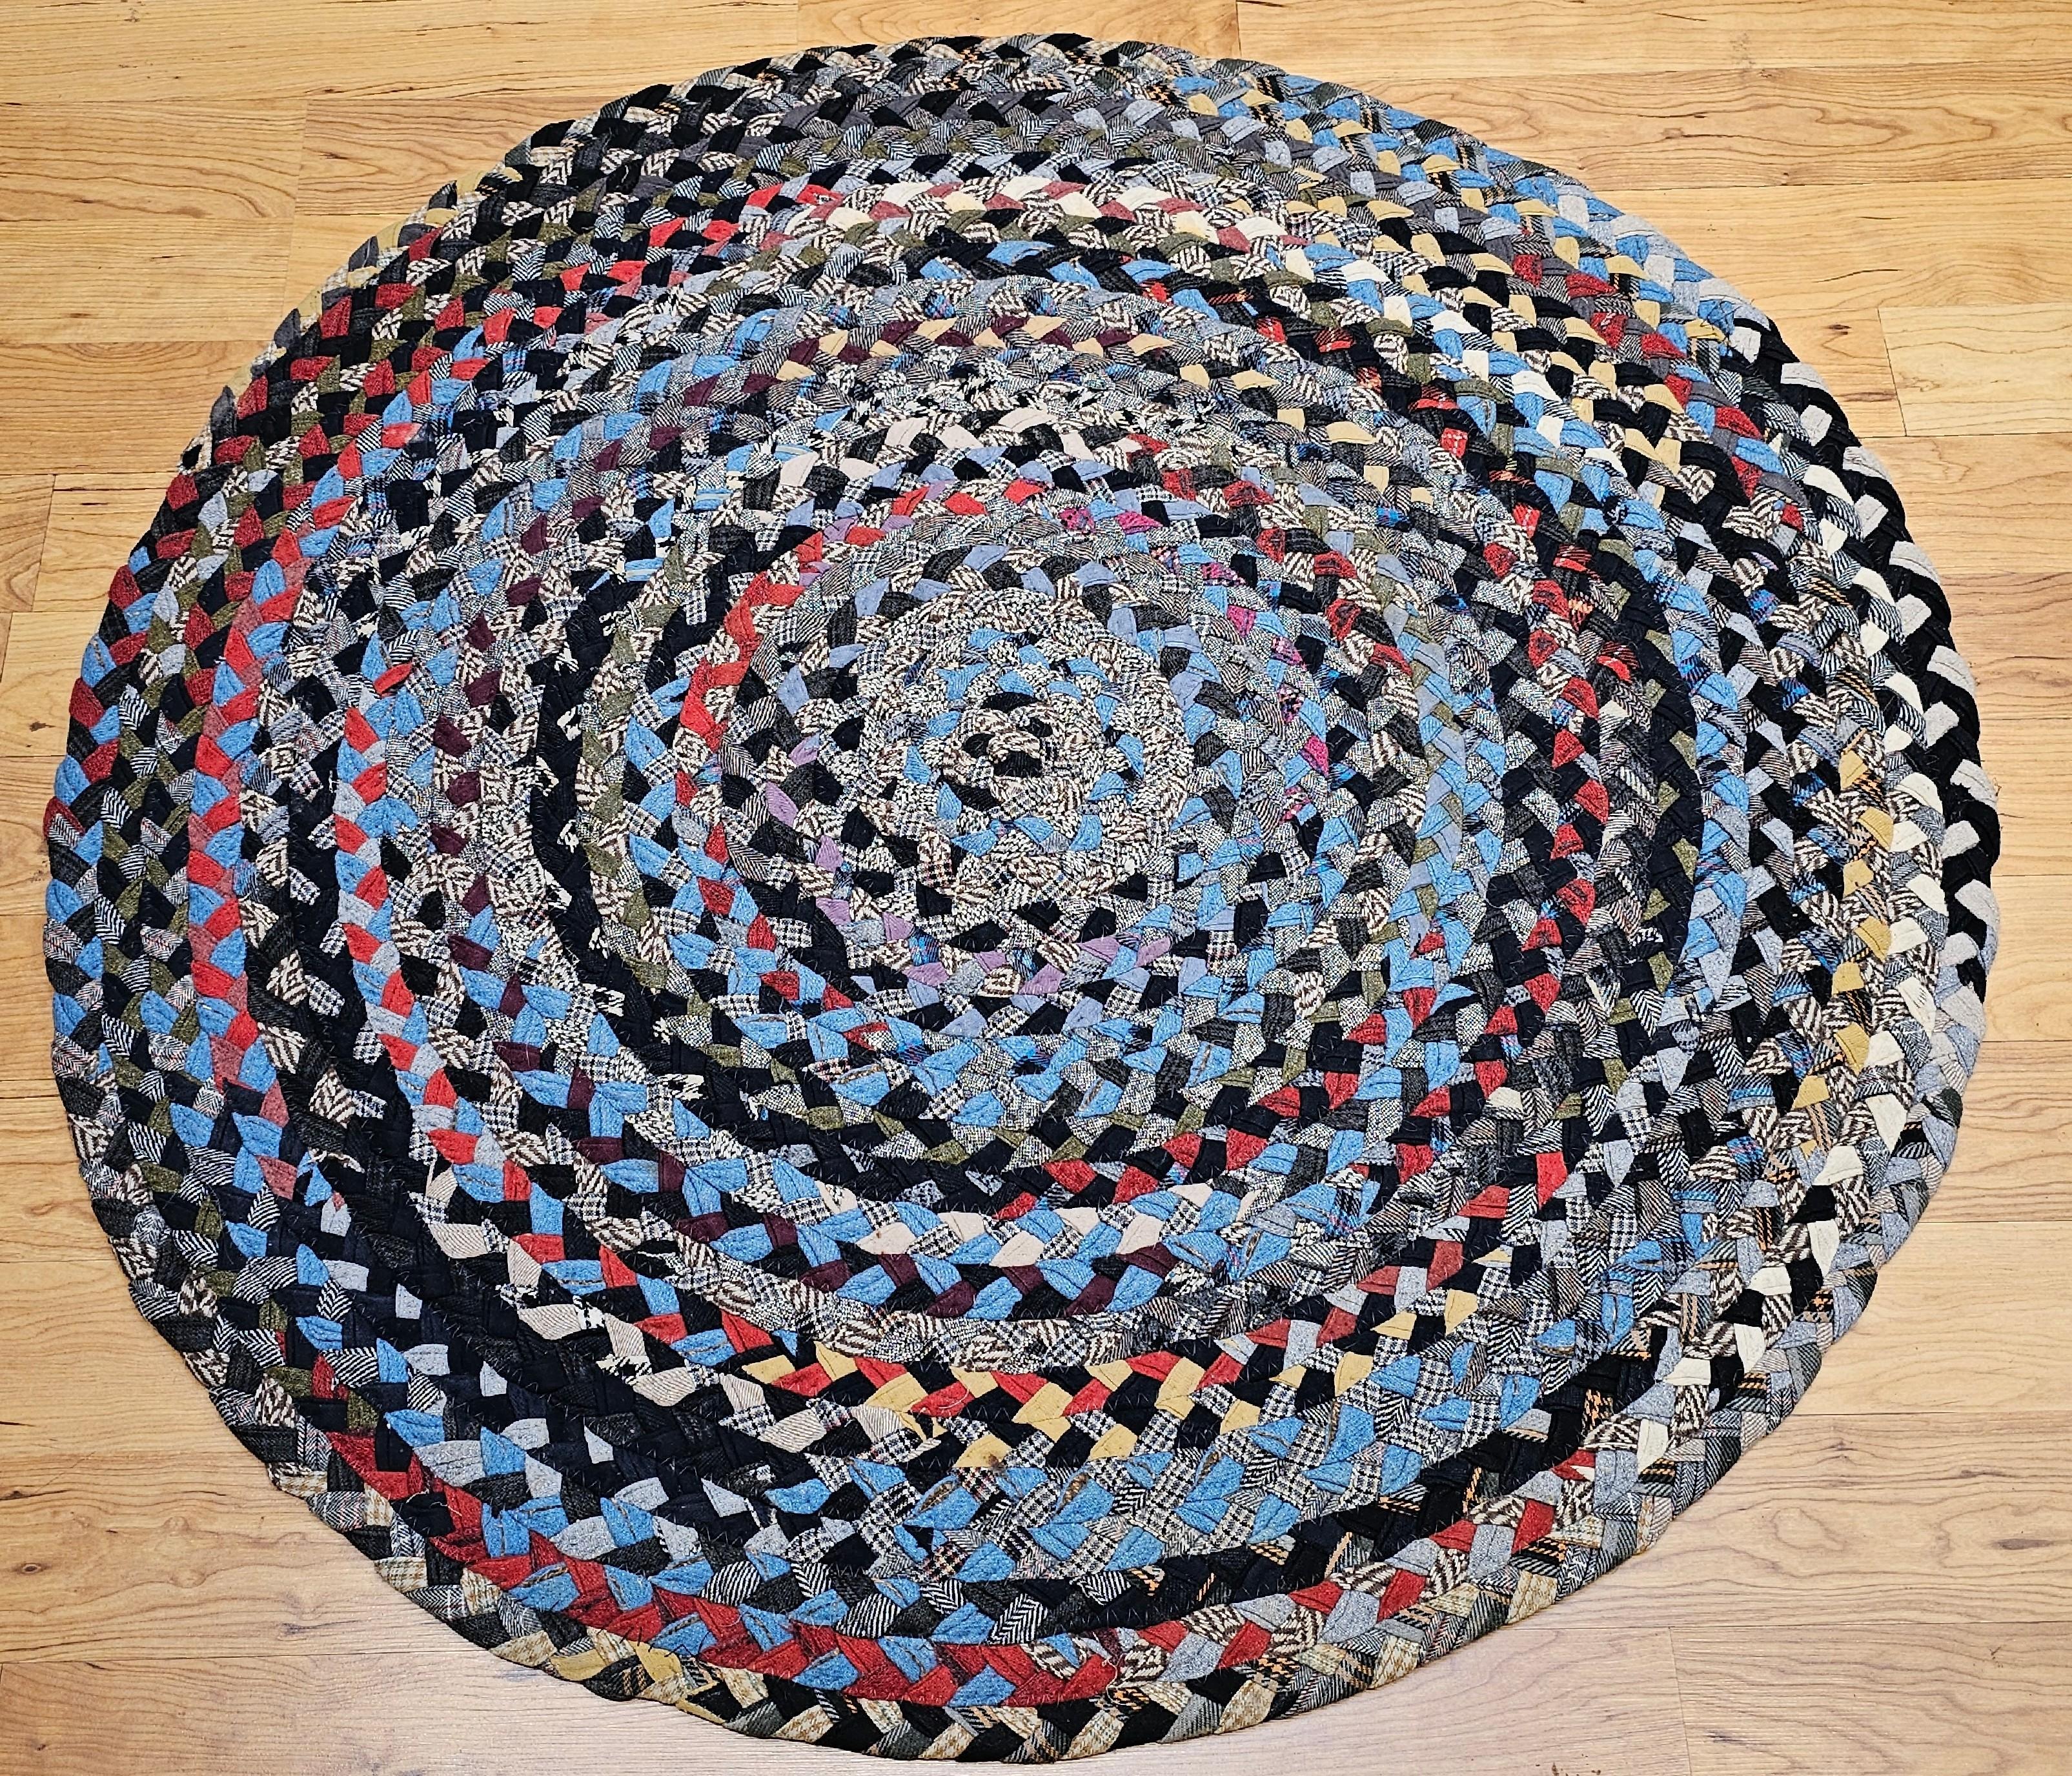 Vintage American Braided Round area rug in blue, red, ivory, green from the 2nd quarter of the 1900s in Red, White, Blue, Yellow, Gray colors.  The rug is a best example of recycling and reusing material as a way of life.  It is made of pieces of